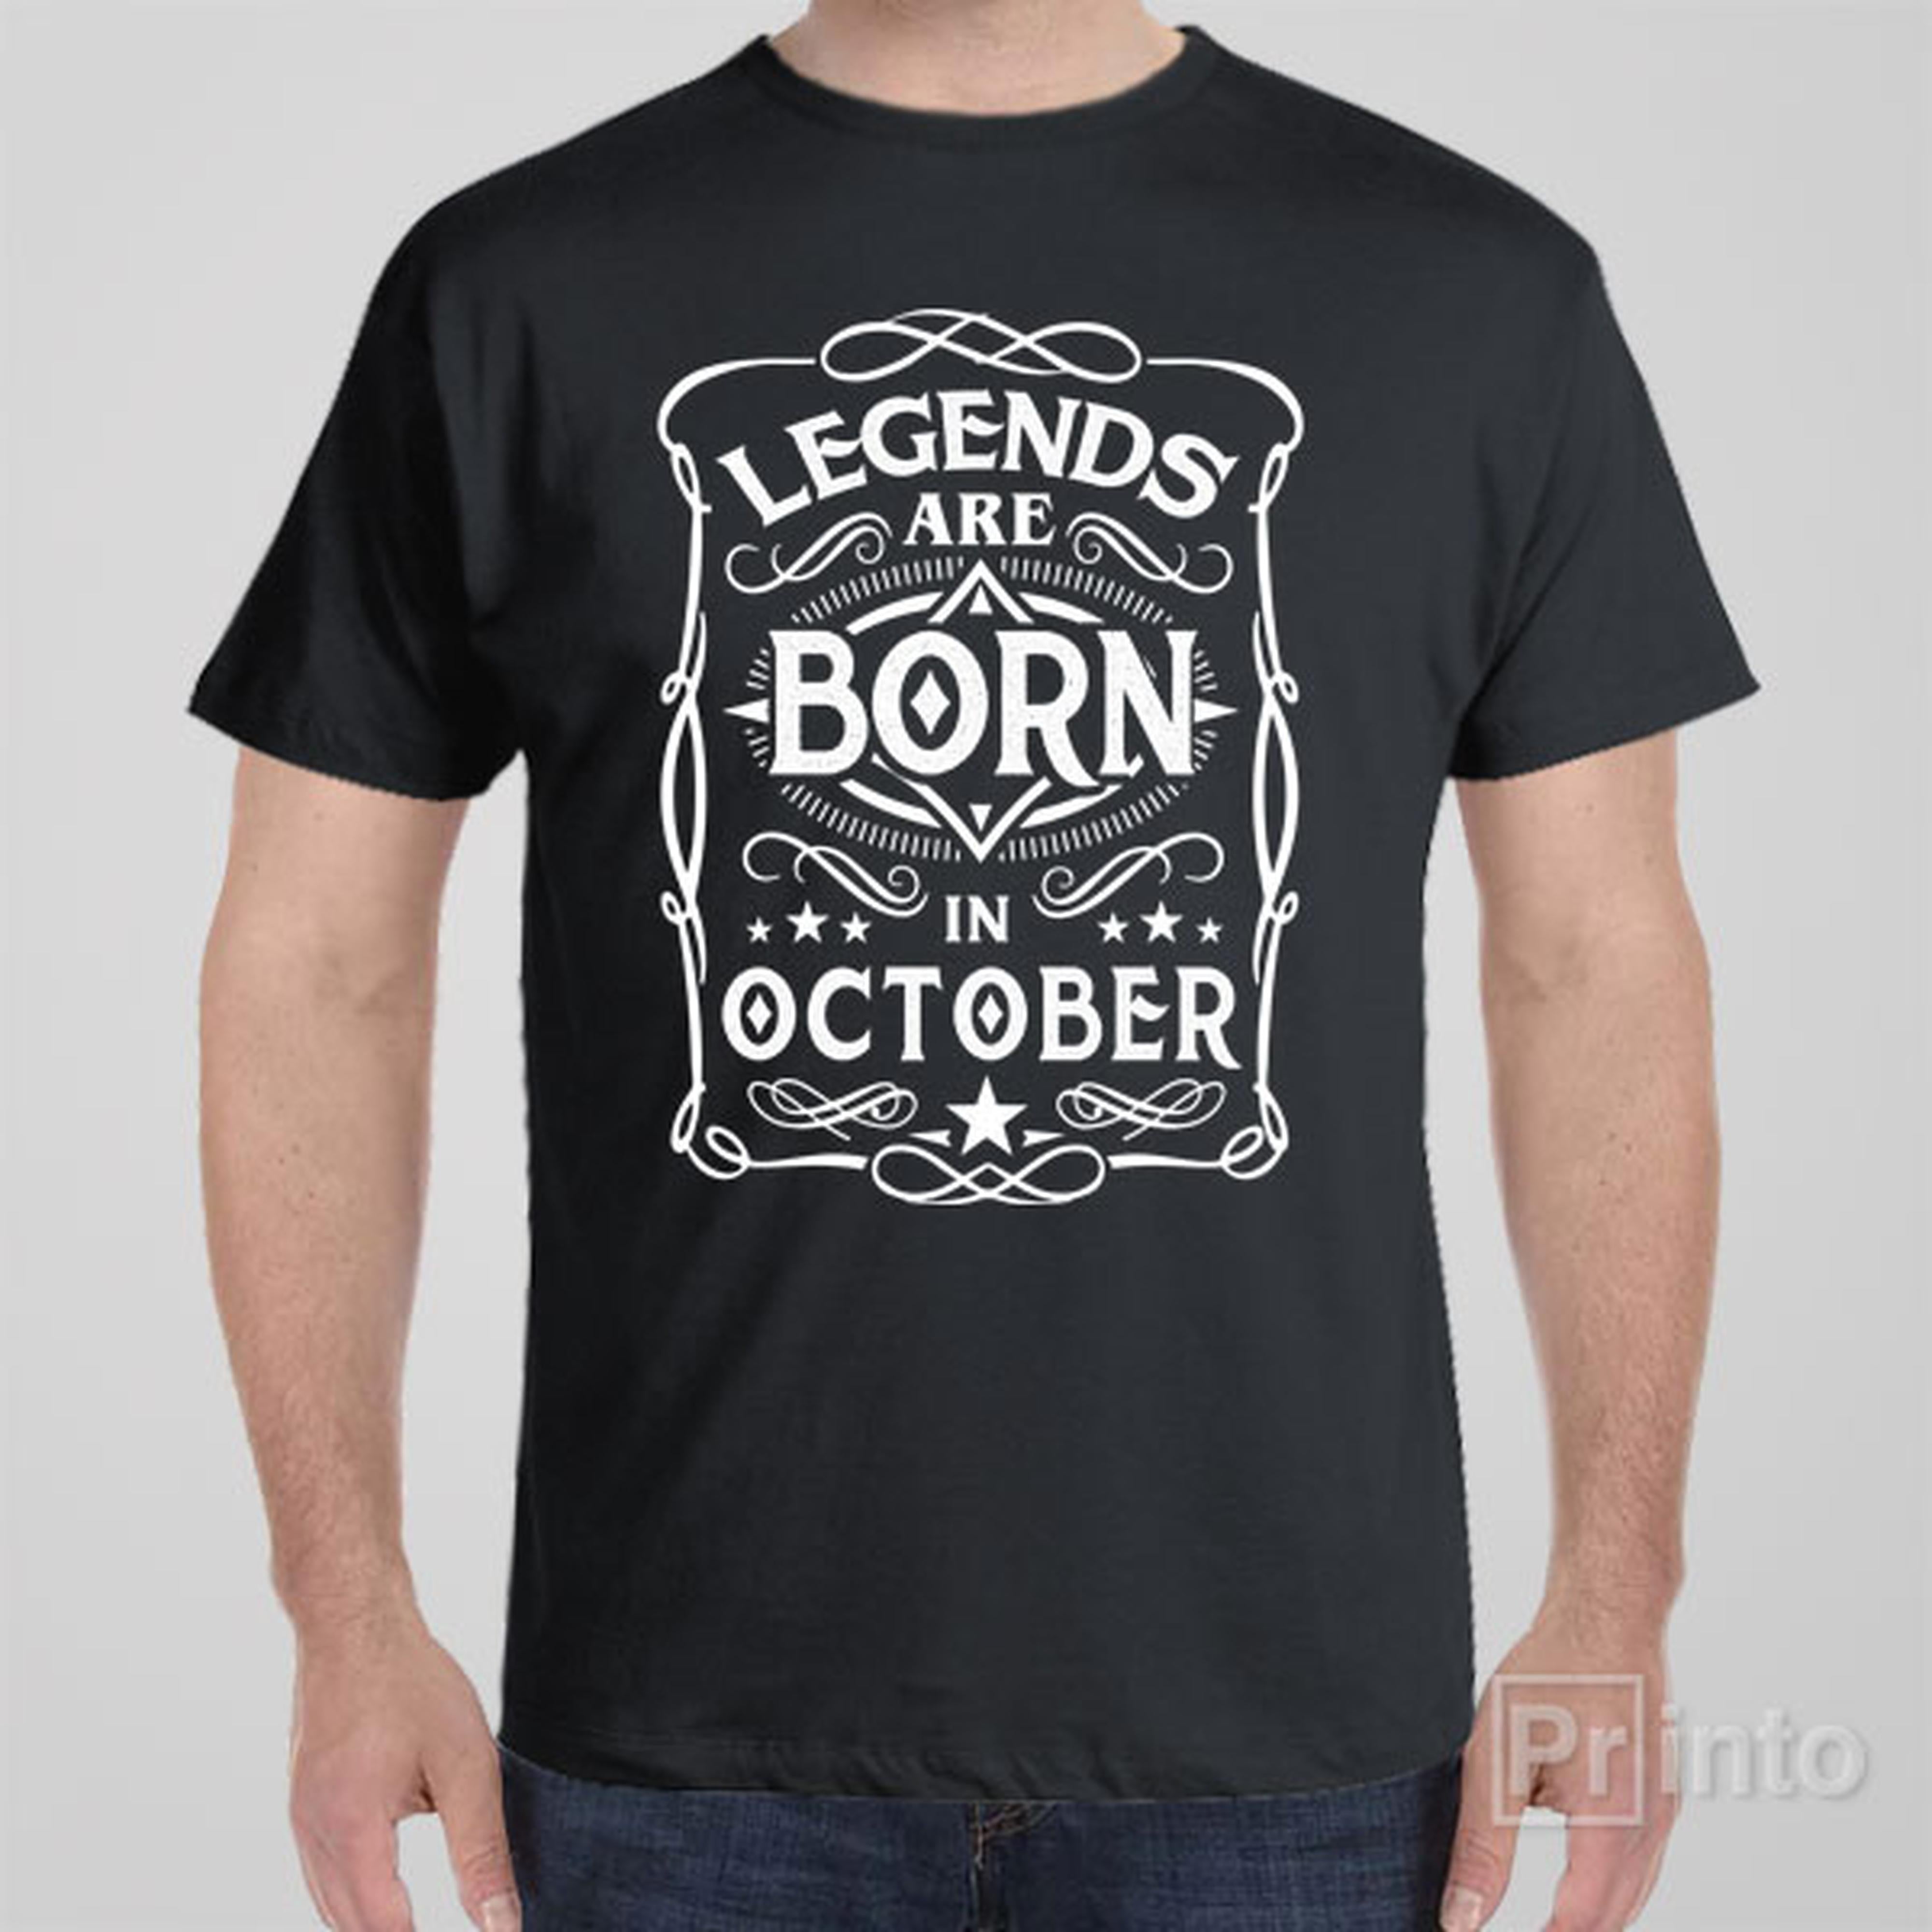 legends-are-born-in-october-t-shirt